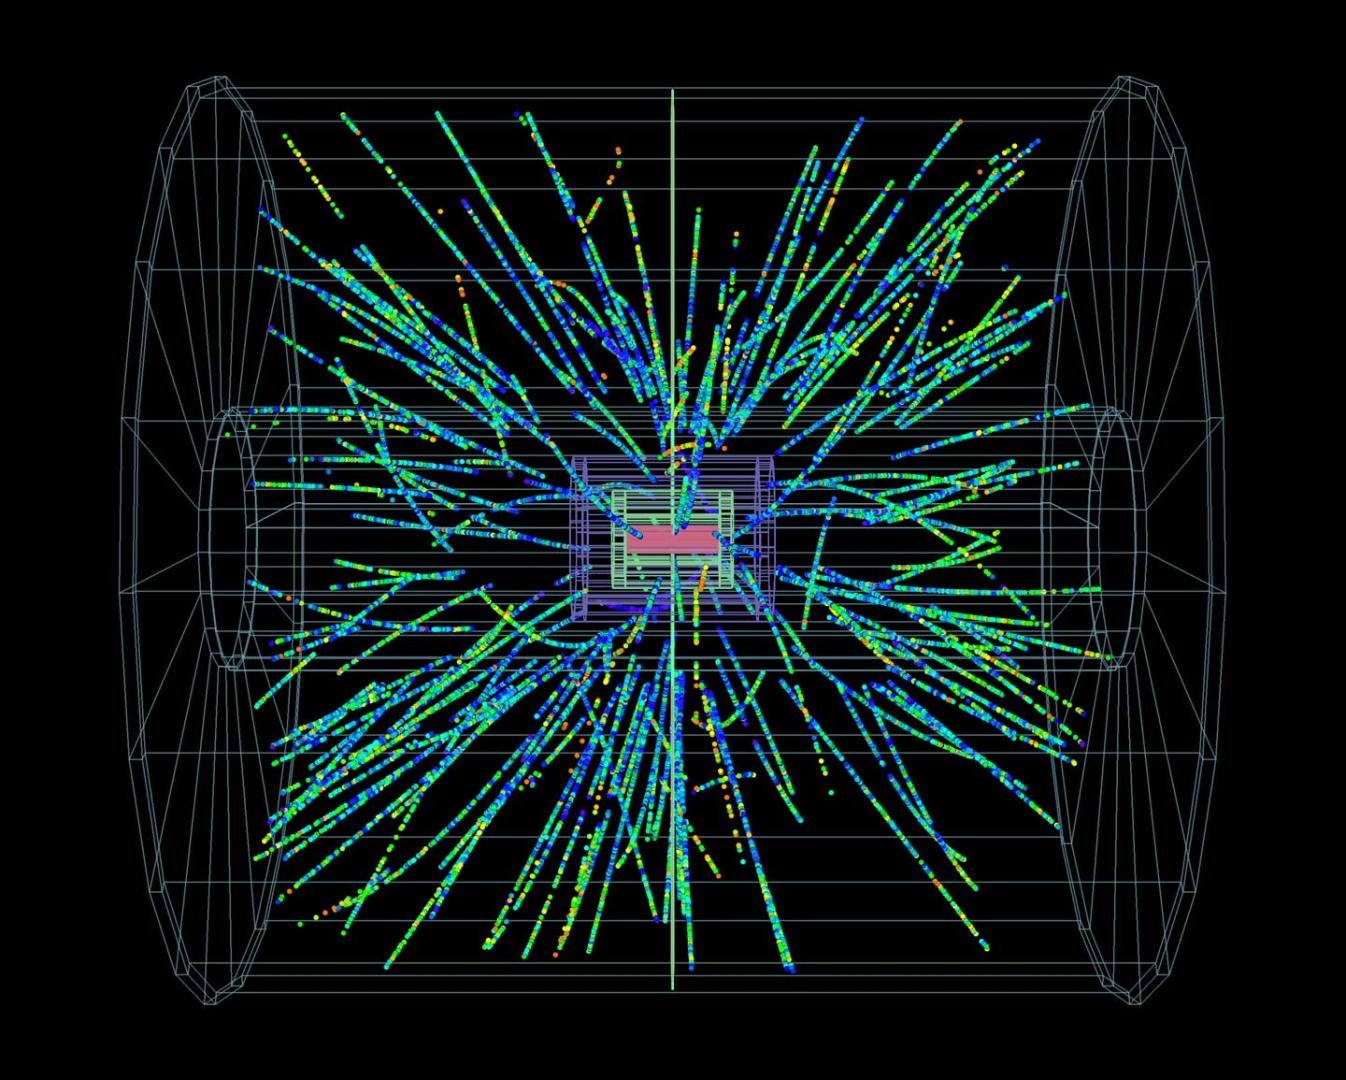 Protons smash lead ions in first LHC collisions of 2013